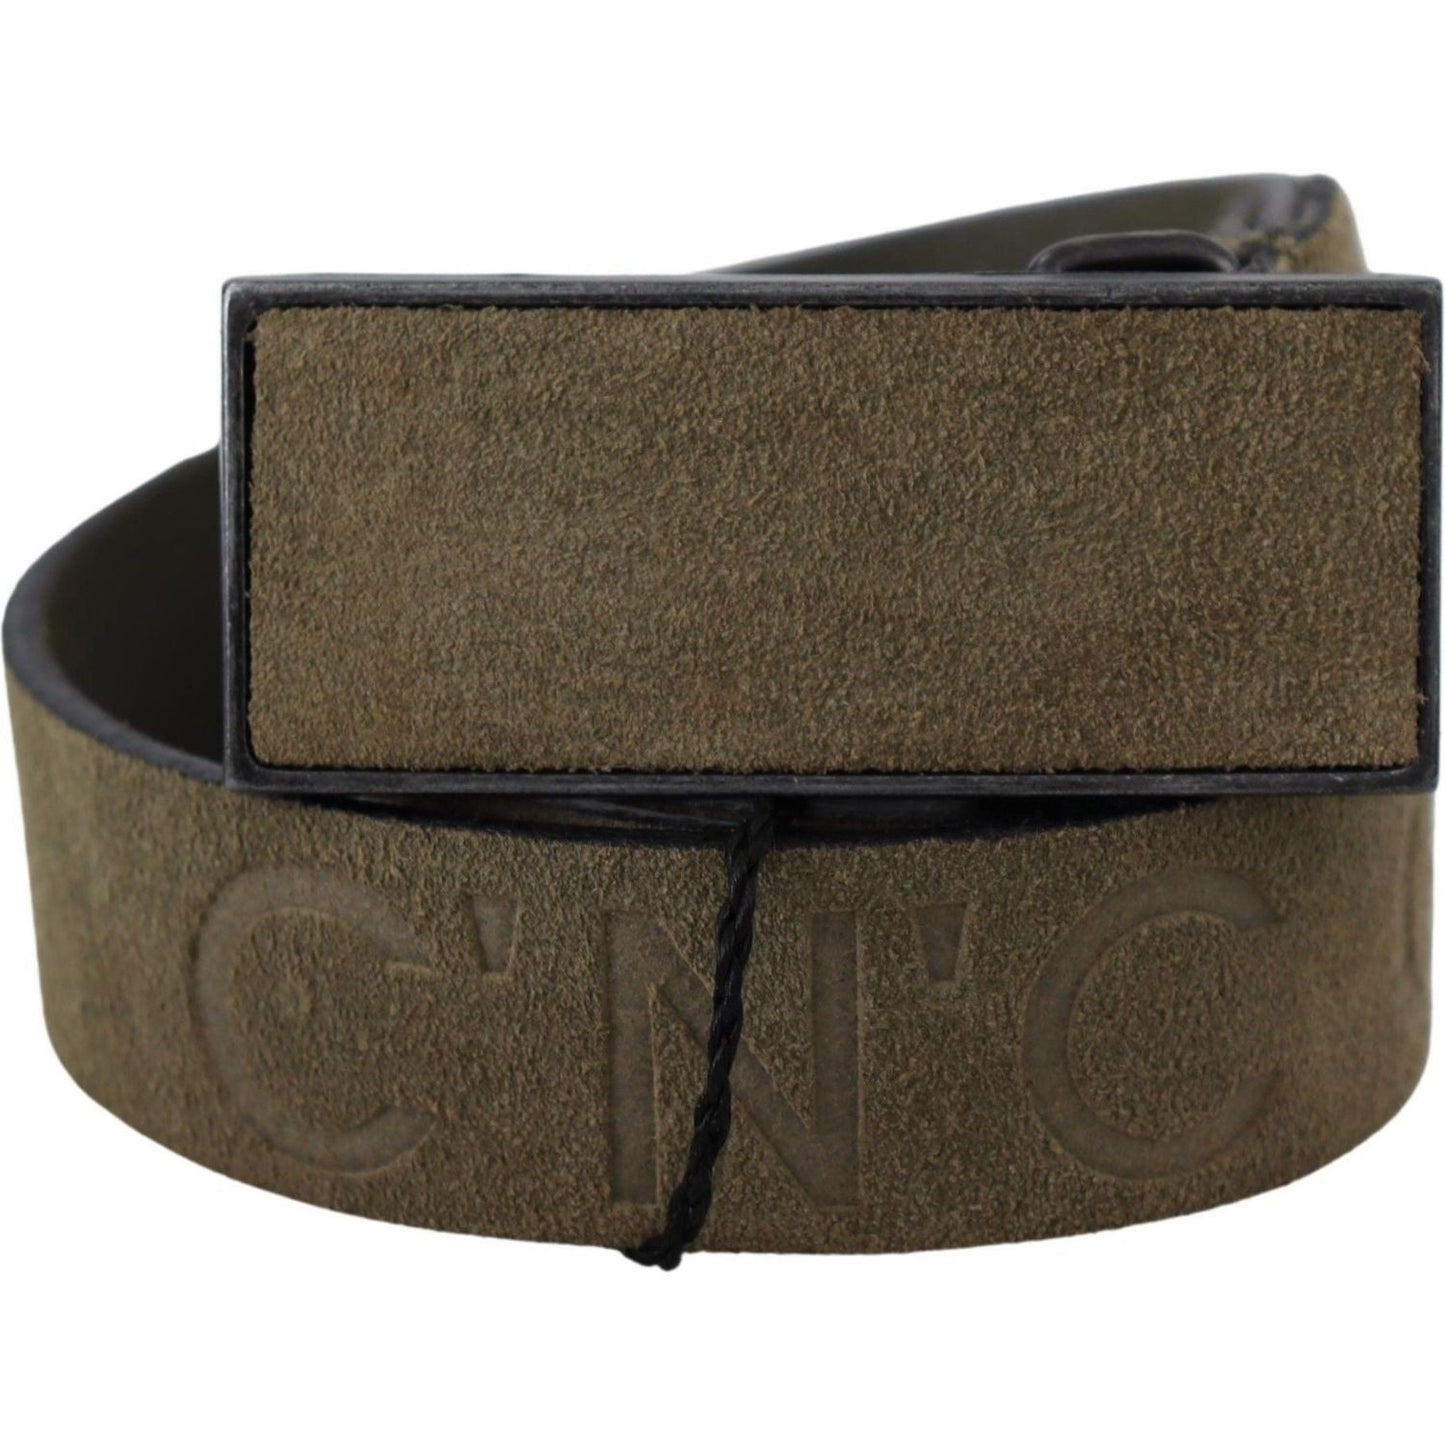 Costume National Chic Army Green Velvet Buckle Leather Belt Belt green-leather-velvet-buckle-waist-army-belt